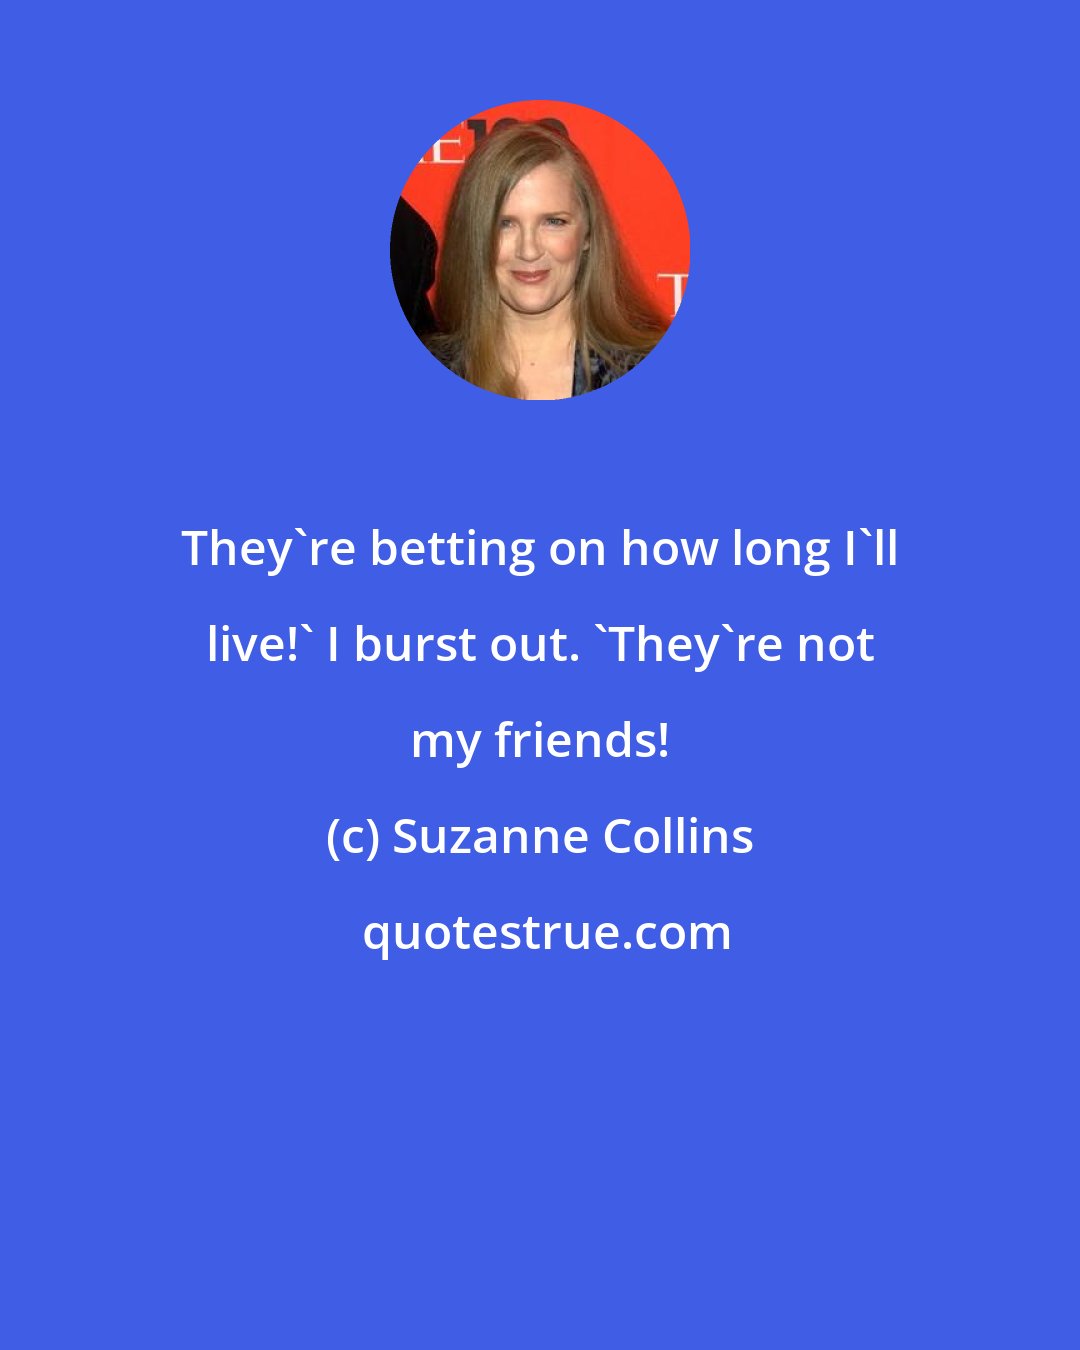 Suzanne Collins: They're betting on how long I'll live!' I burst out. 'They're not my friends!